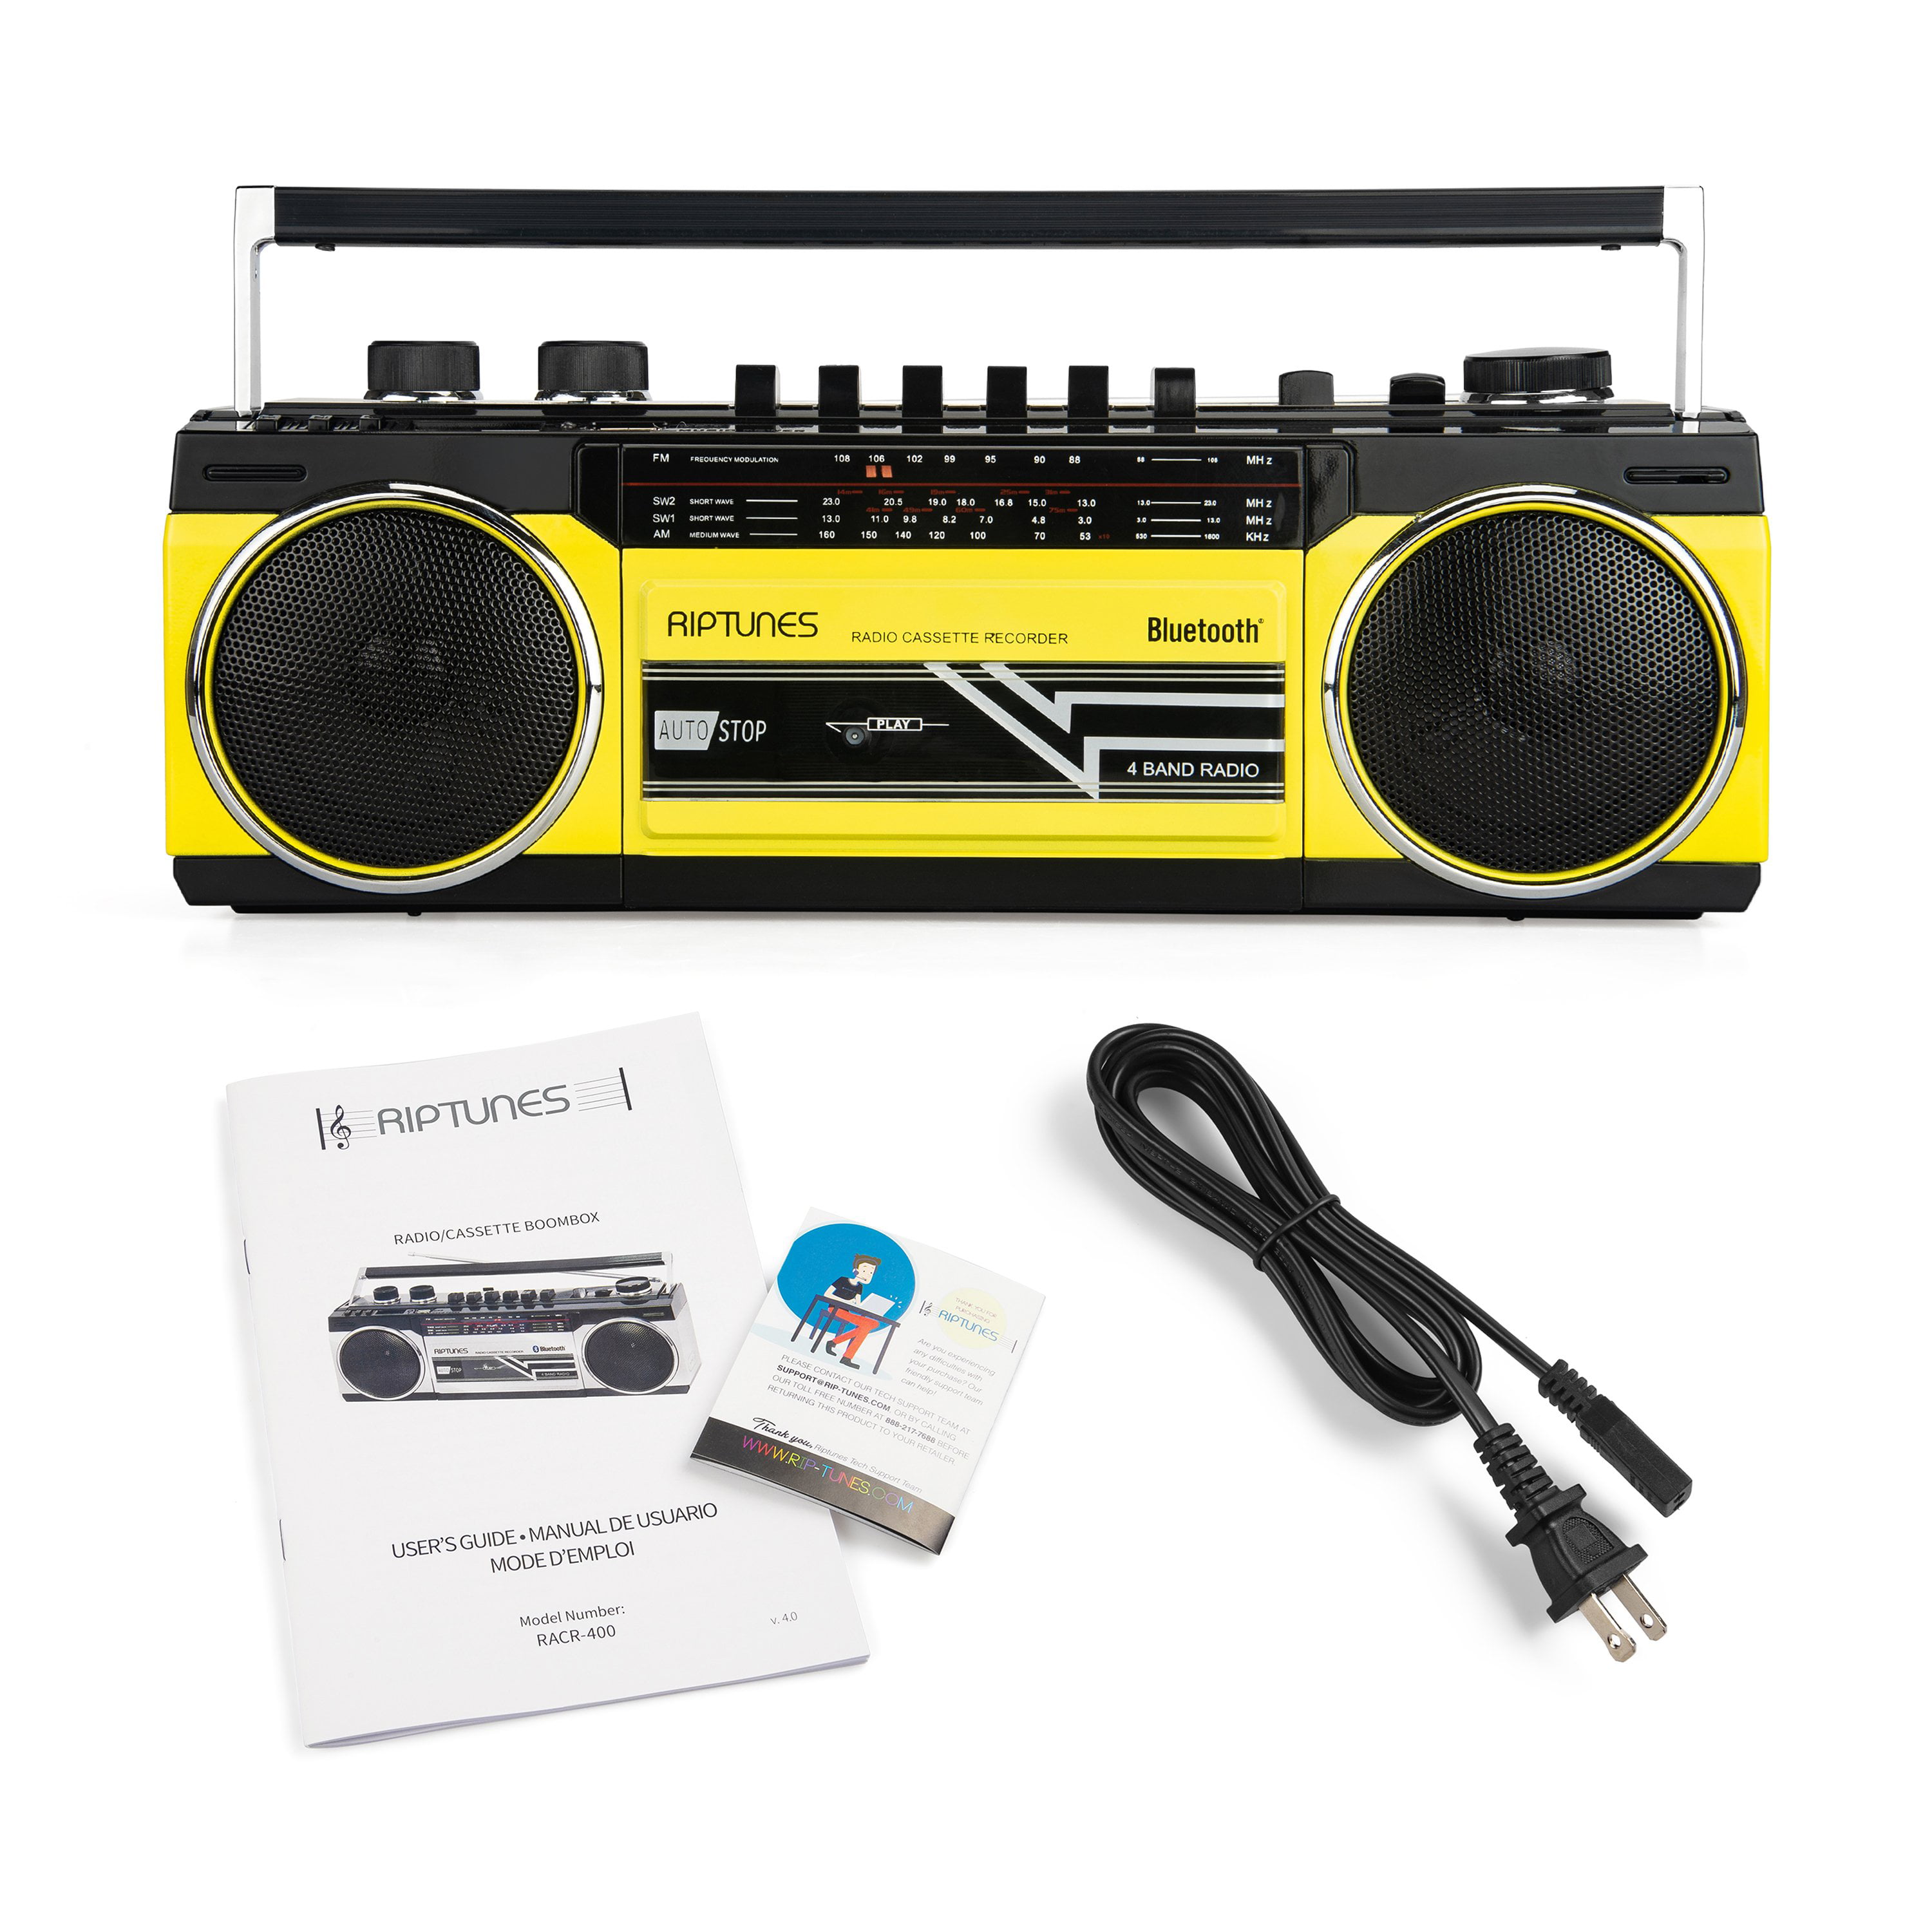 Riptunes Retro Boombox Cassette Player and Recorder, AM/FM/SW1/SW2 Band  Radio Radio with Blueooth